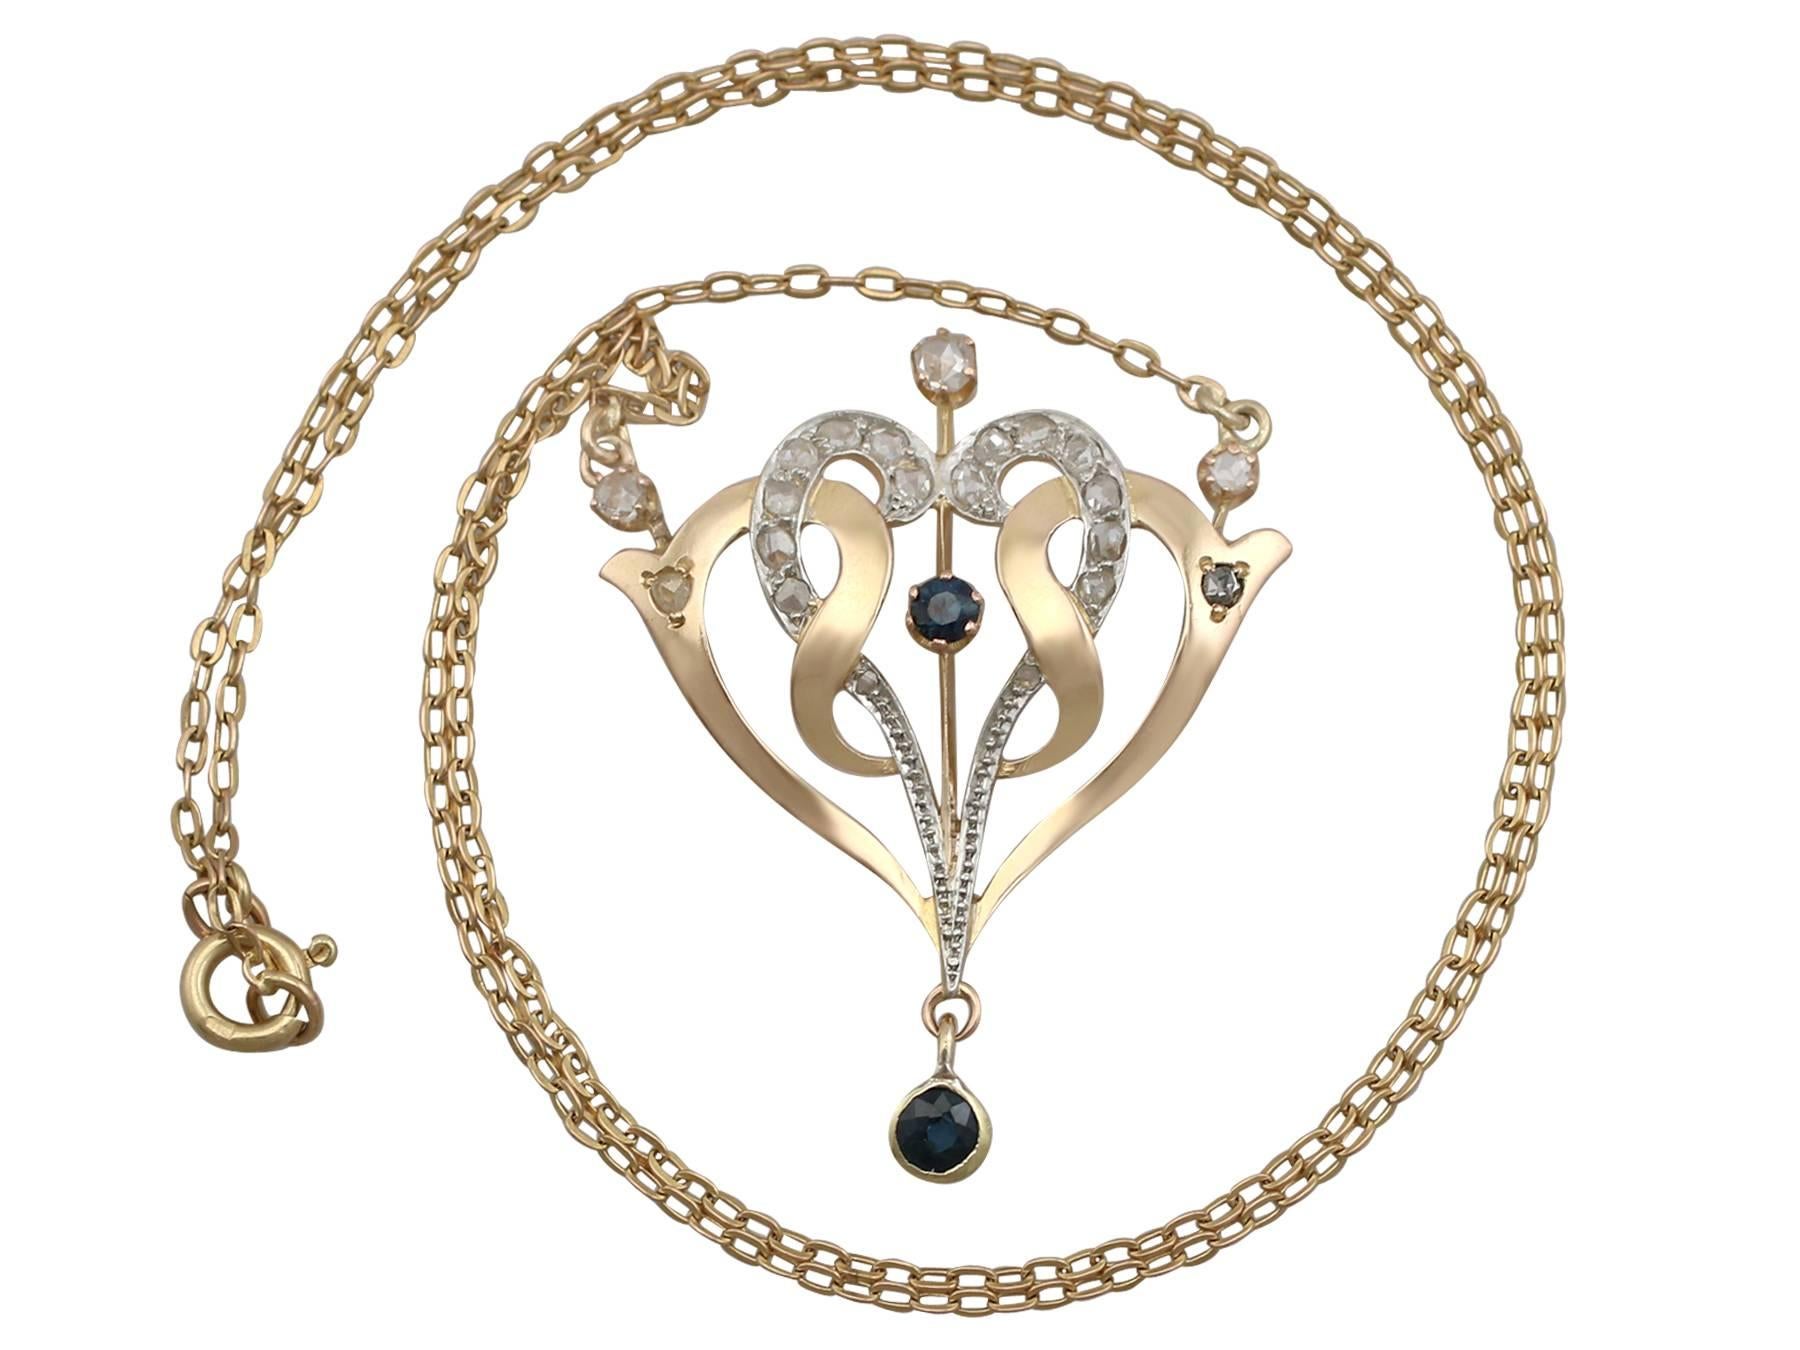 A fine 0.30 carat blue sapphire and 0.52 carat diamond, 18 karat yellow and white gold necklace; part of our diverse Art Nouveau jewelry collections

This fine and impressive antique Art Nouveau necklace has been crafted in 18k yellow gold with an